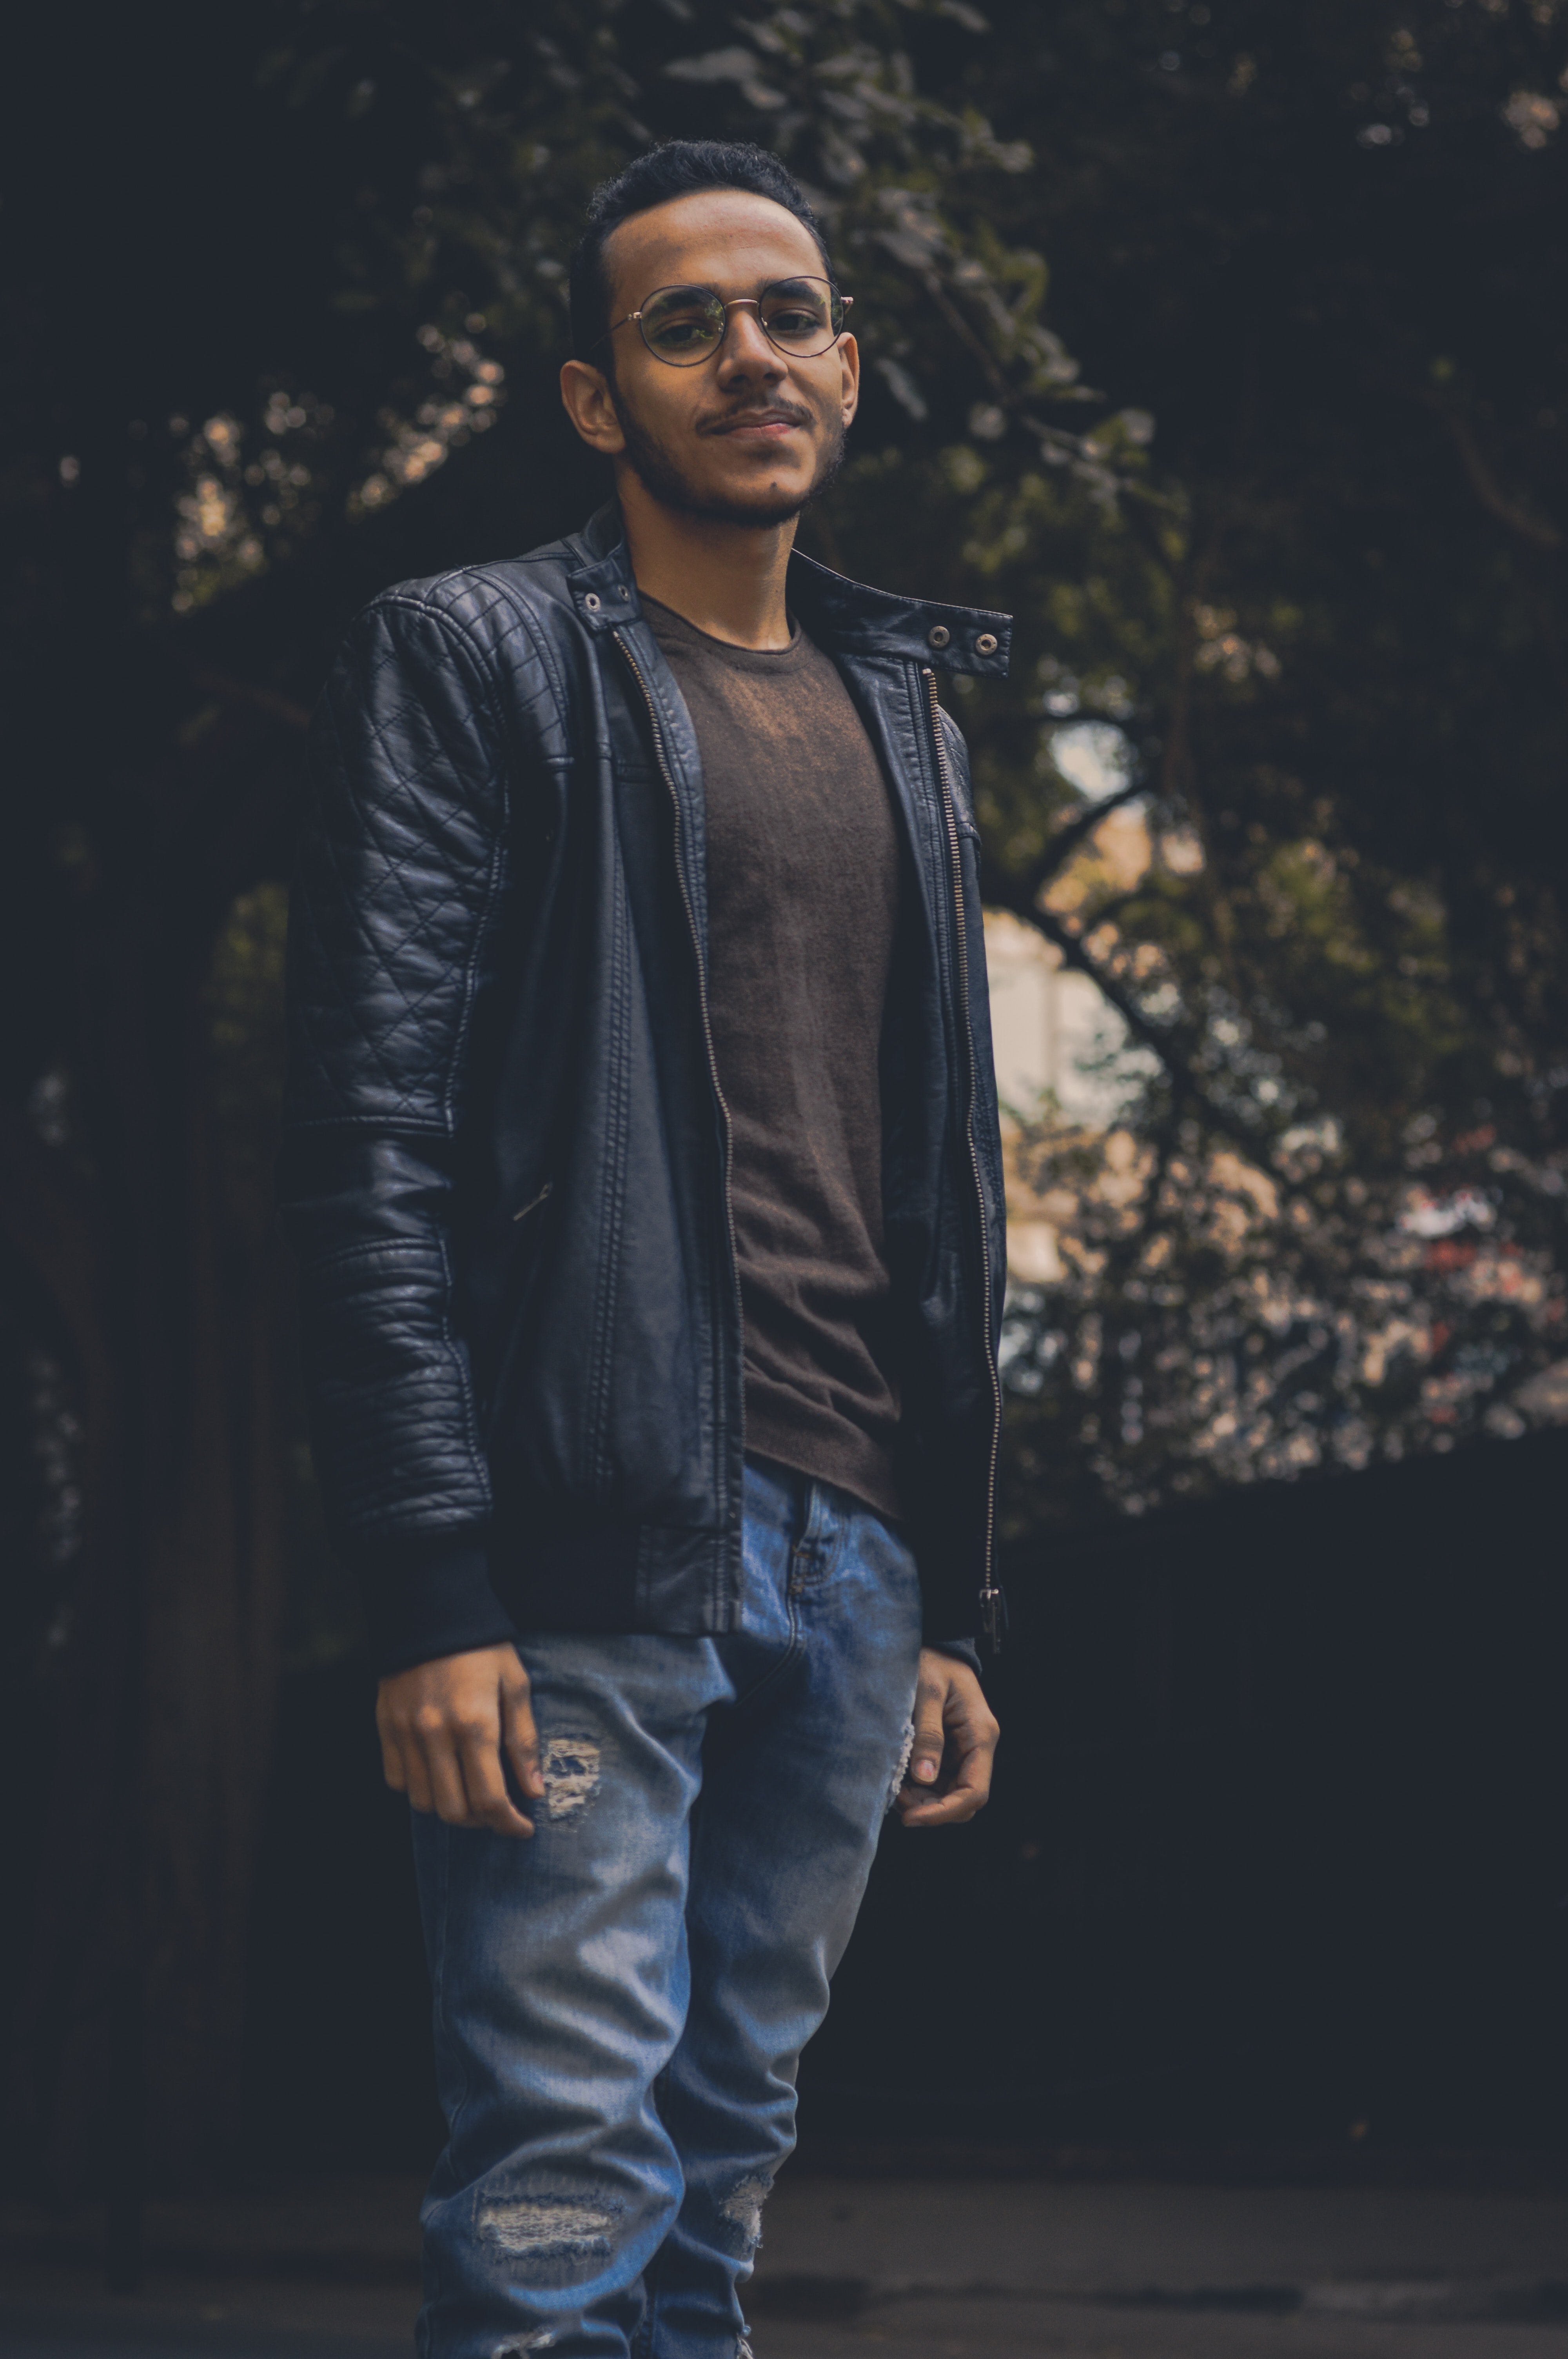 Free photo: Man in Brown Shirt and Black Leather Zip-up Jacket and Blue ...